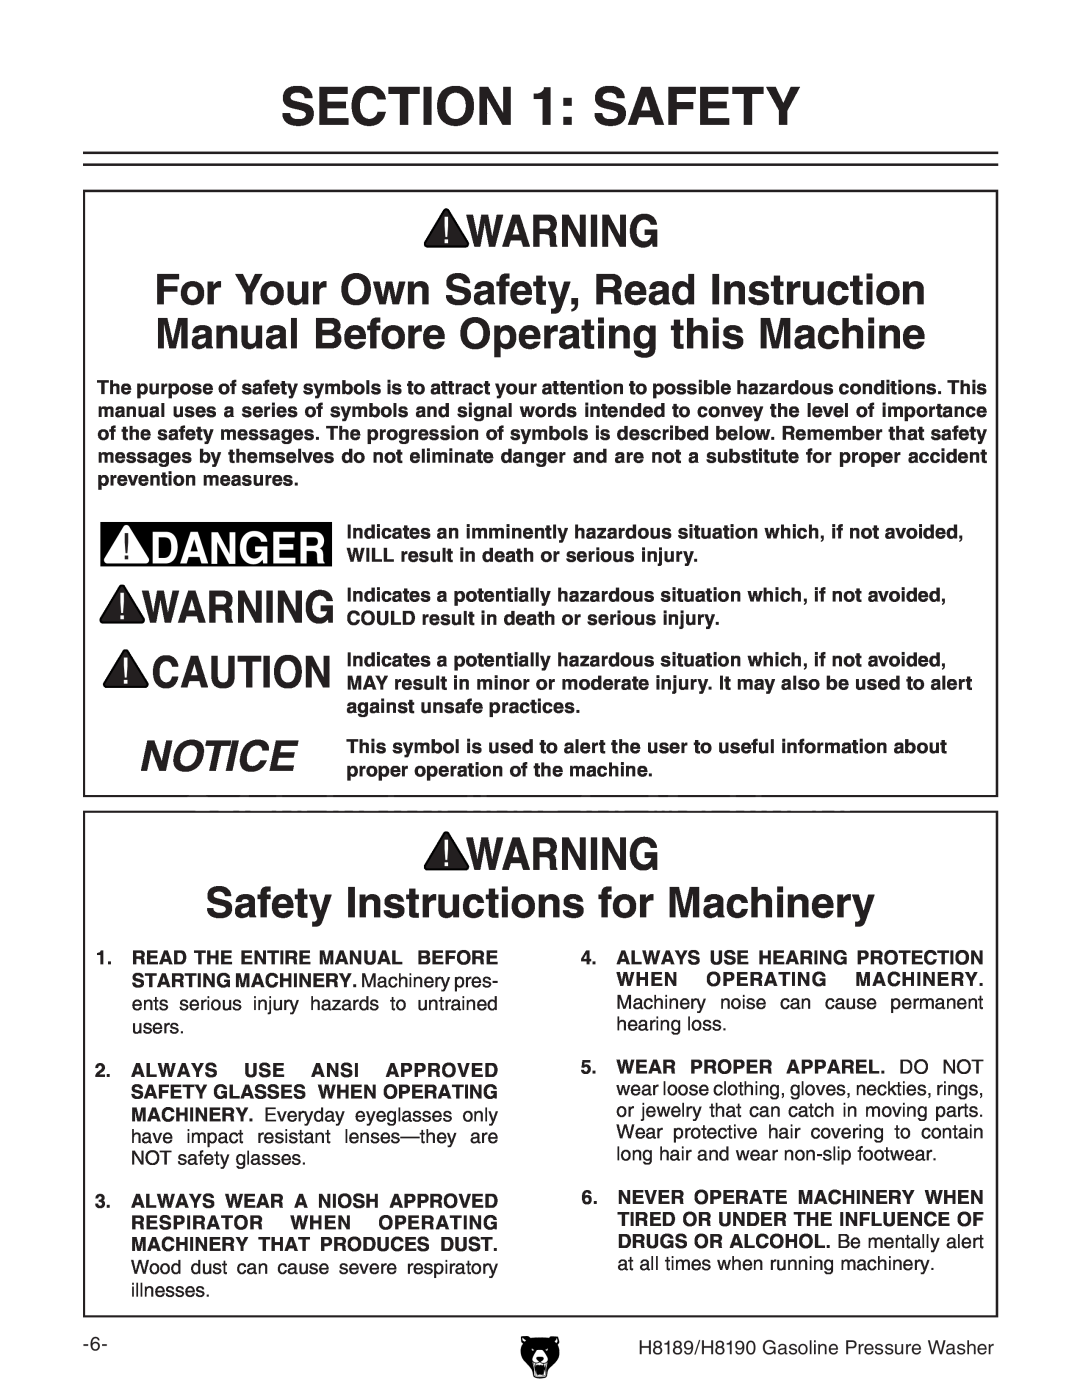 Grizzly owner manual Safety Instructions for Machinery, H8189/H8190 Gasoline Pressure Washer 